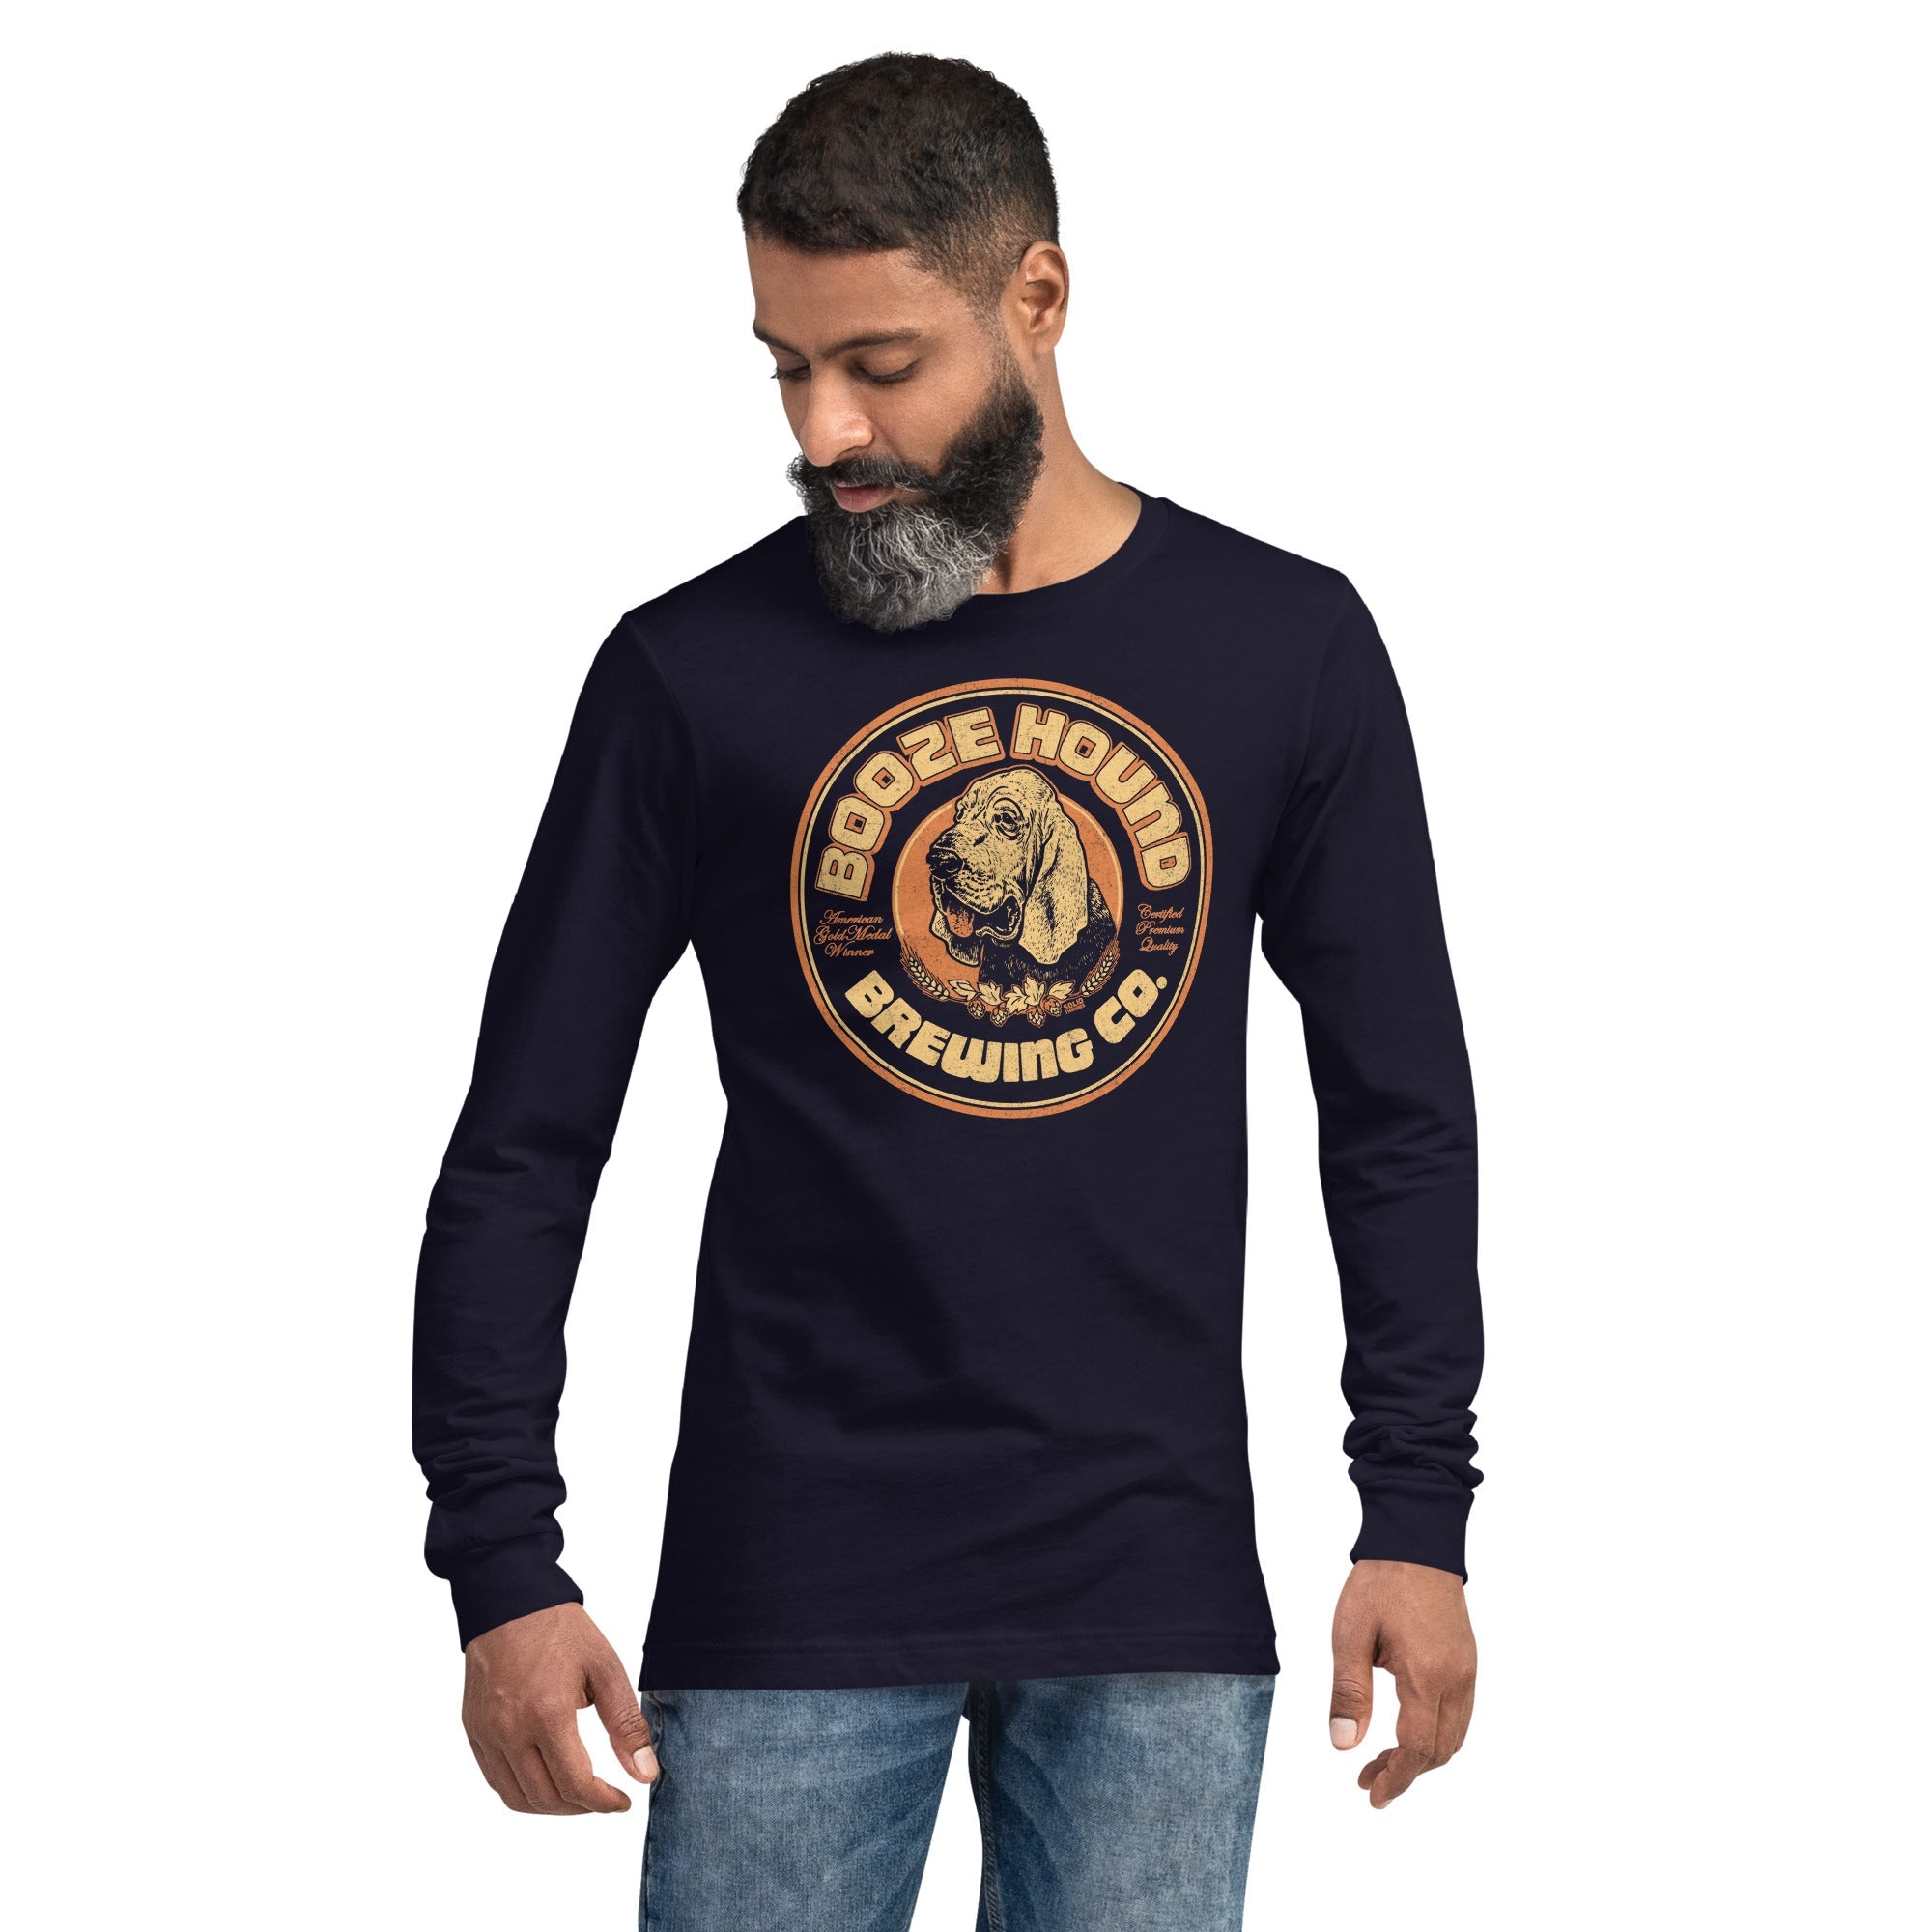 Boozehound Brewing Co. Vintage Graphic Long Sleeve Tee | Retro Drinking T-Shirt On Model - Solid Threads